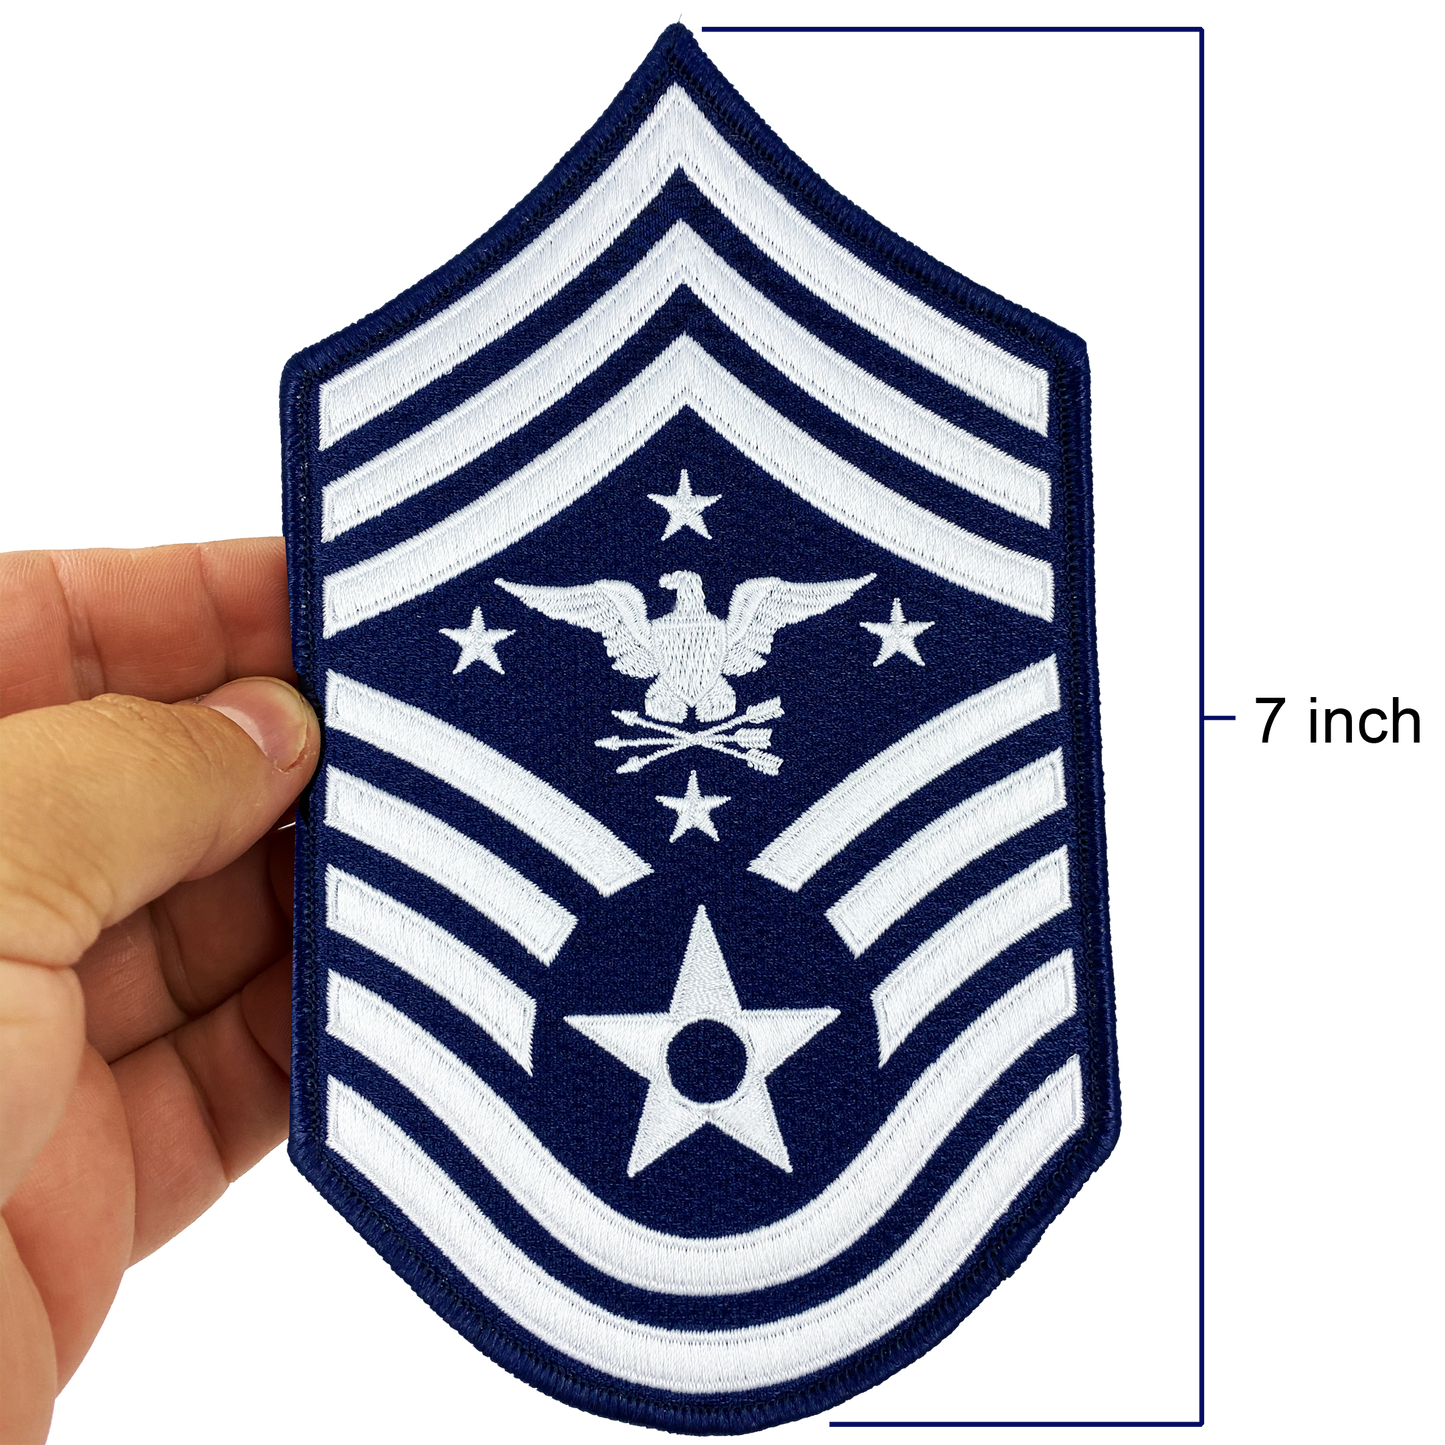 DL1-14 Senior Enlisted Advisor to the Chairman of the Joint Chiefs of Staff Air Force Senior Enlisted Advisor Chief Master Sergeant Rank (Eagle Looking Left) USAF Patch 